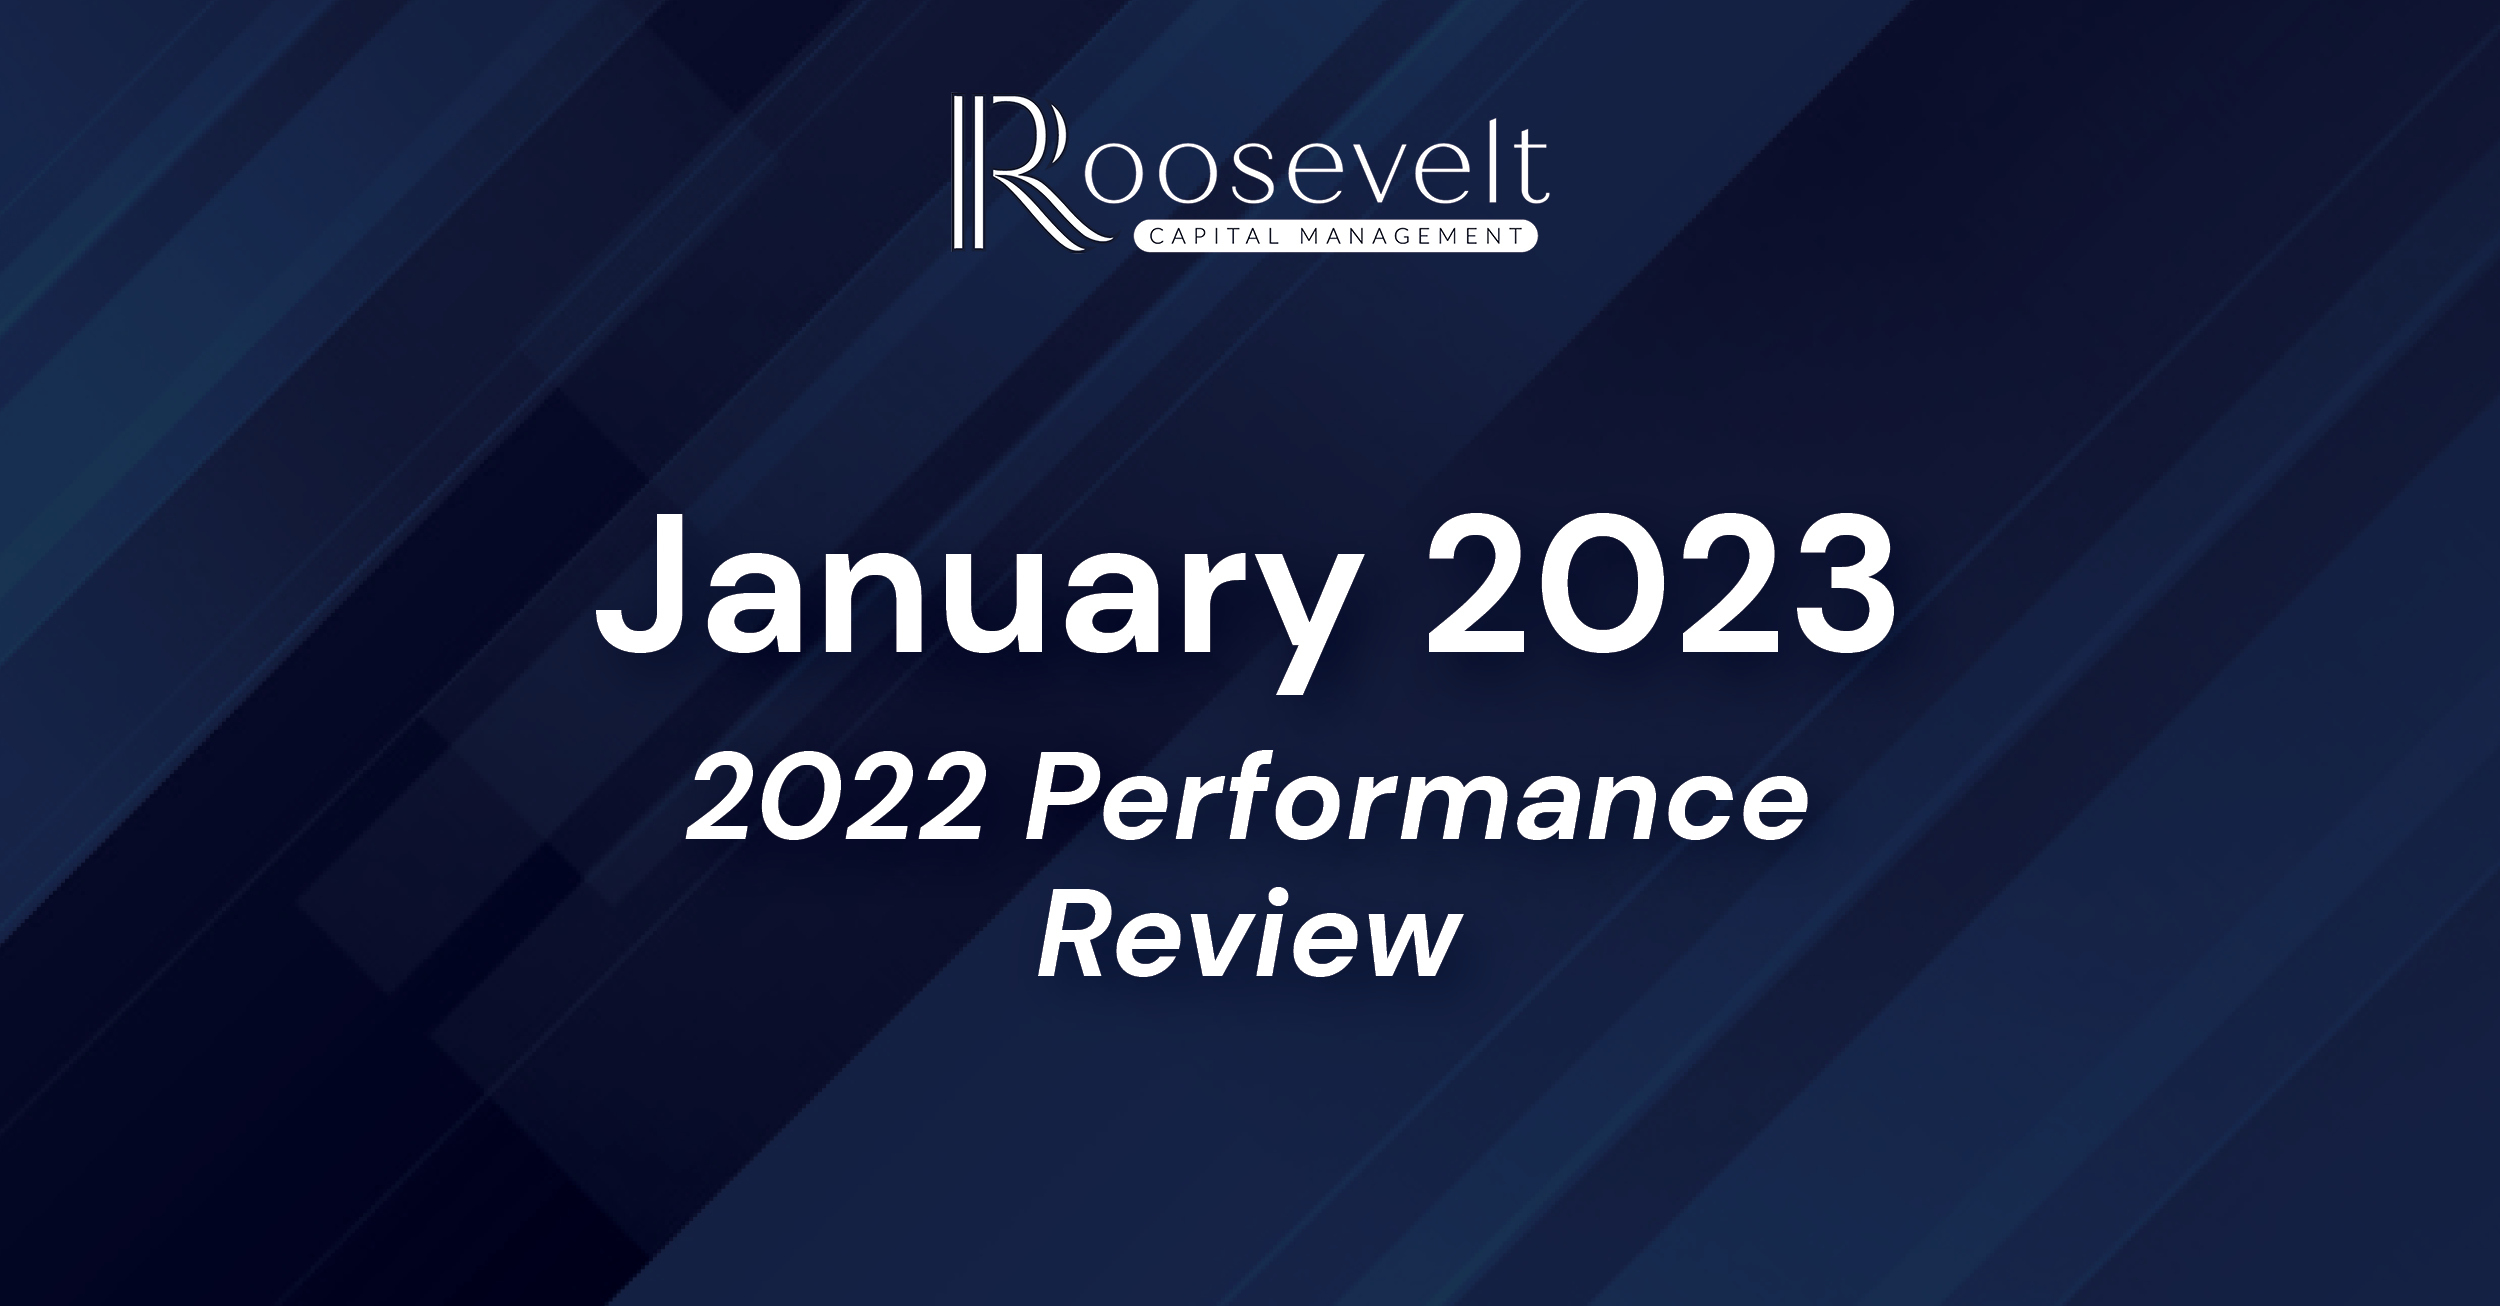 January 2023 – 2022 Performance Review